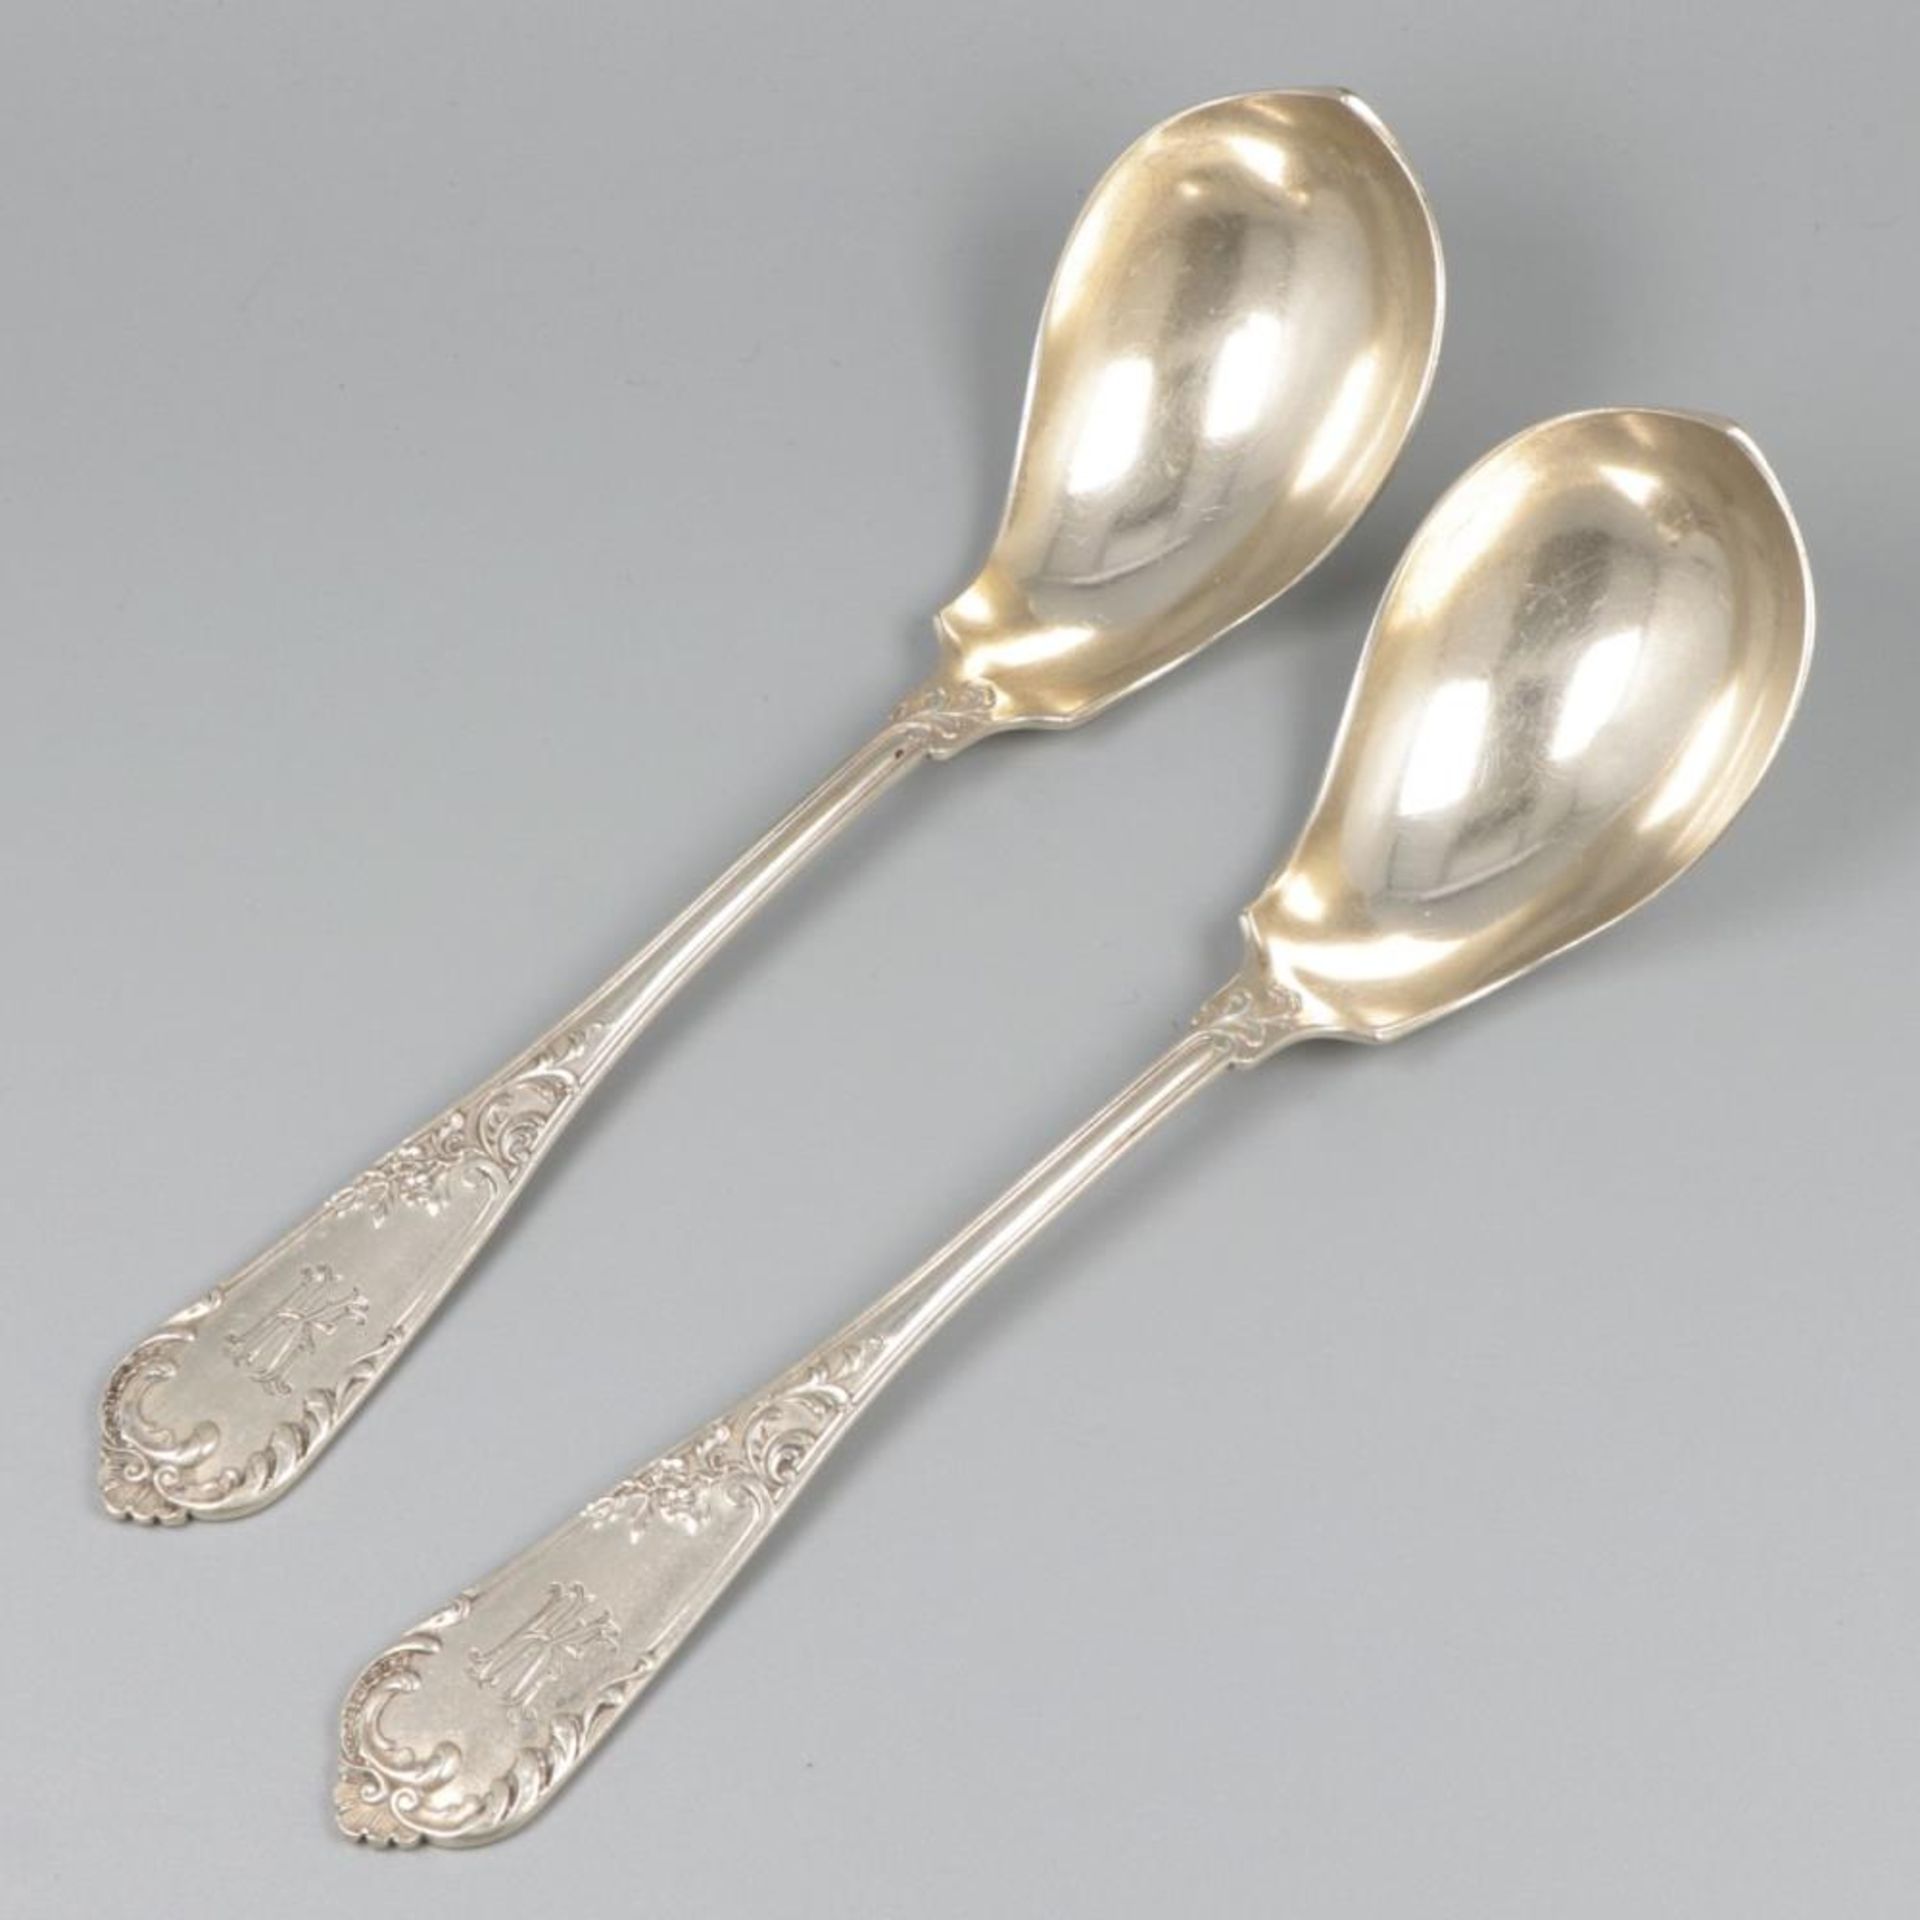 2-piece set of silver spoons.